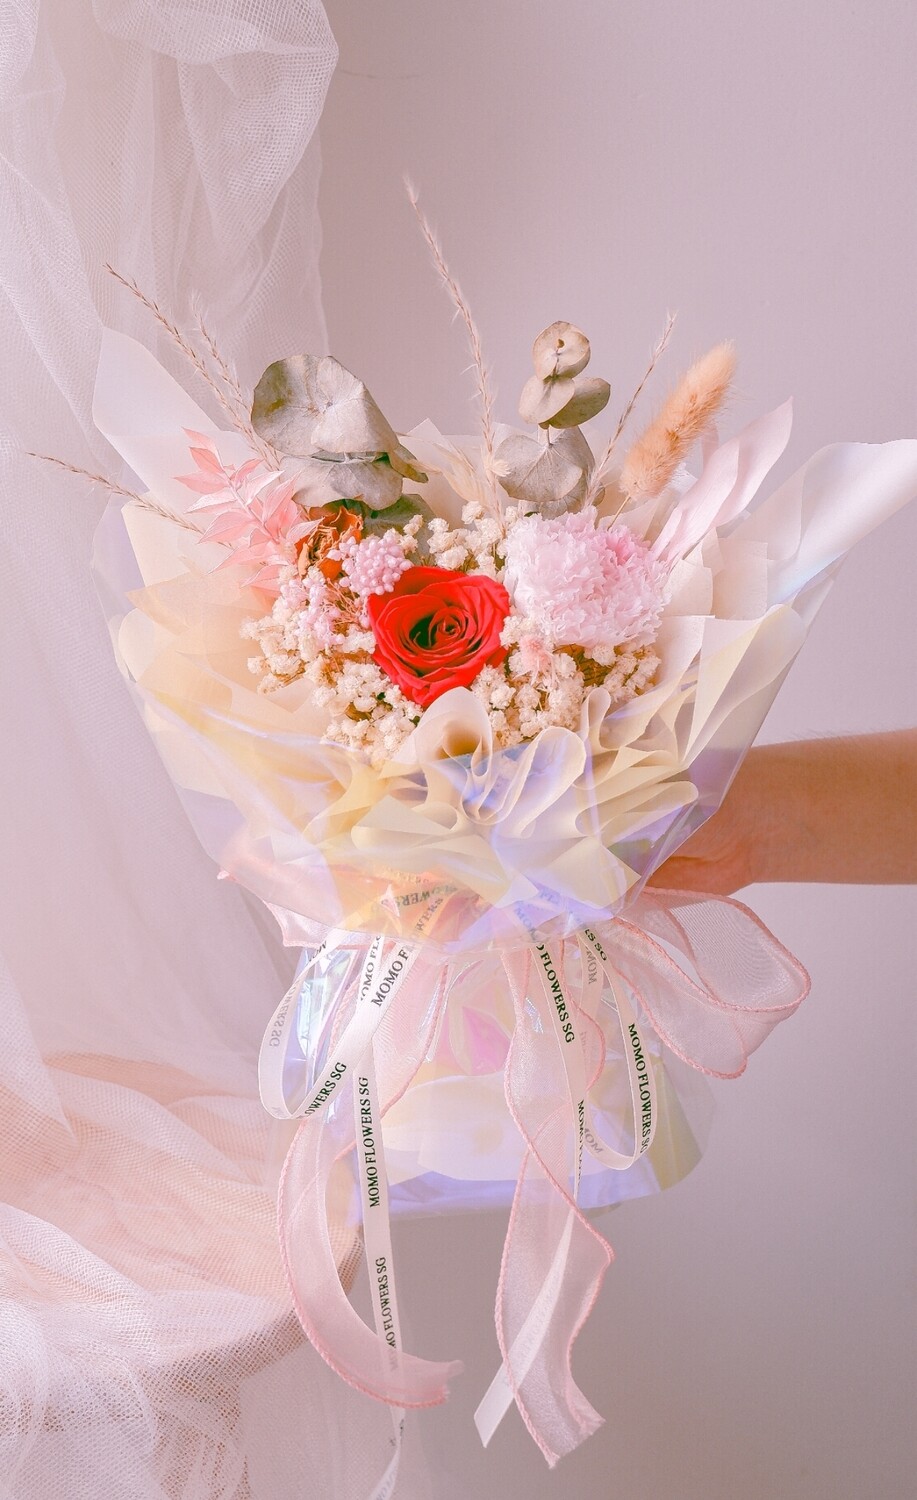 MOTHER'S DAY SPECIAL: Carnation & Rose Eternal Bouquet